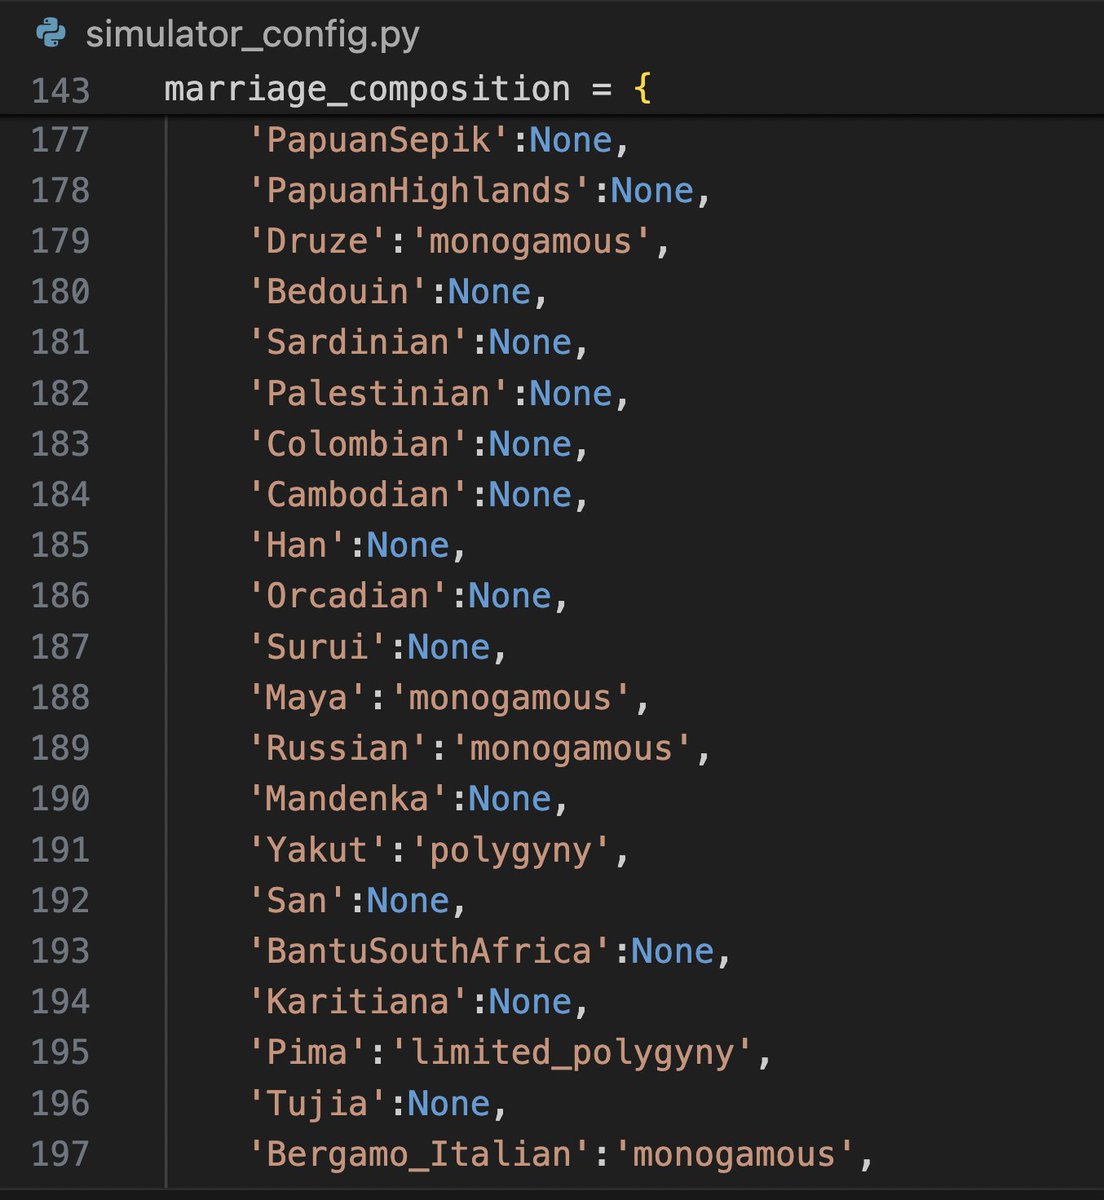 I'm compiling my simulator's configuration on marriage composition across different ethnic groups but I'm still lacking some info. Any hints on any comprehensive (and more modern) ethnographic atlases? (so far I used an atlas from 1980s but I feel that might be a bit outdated).…